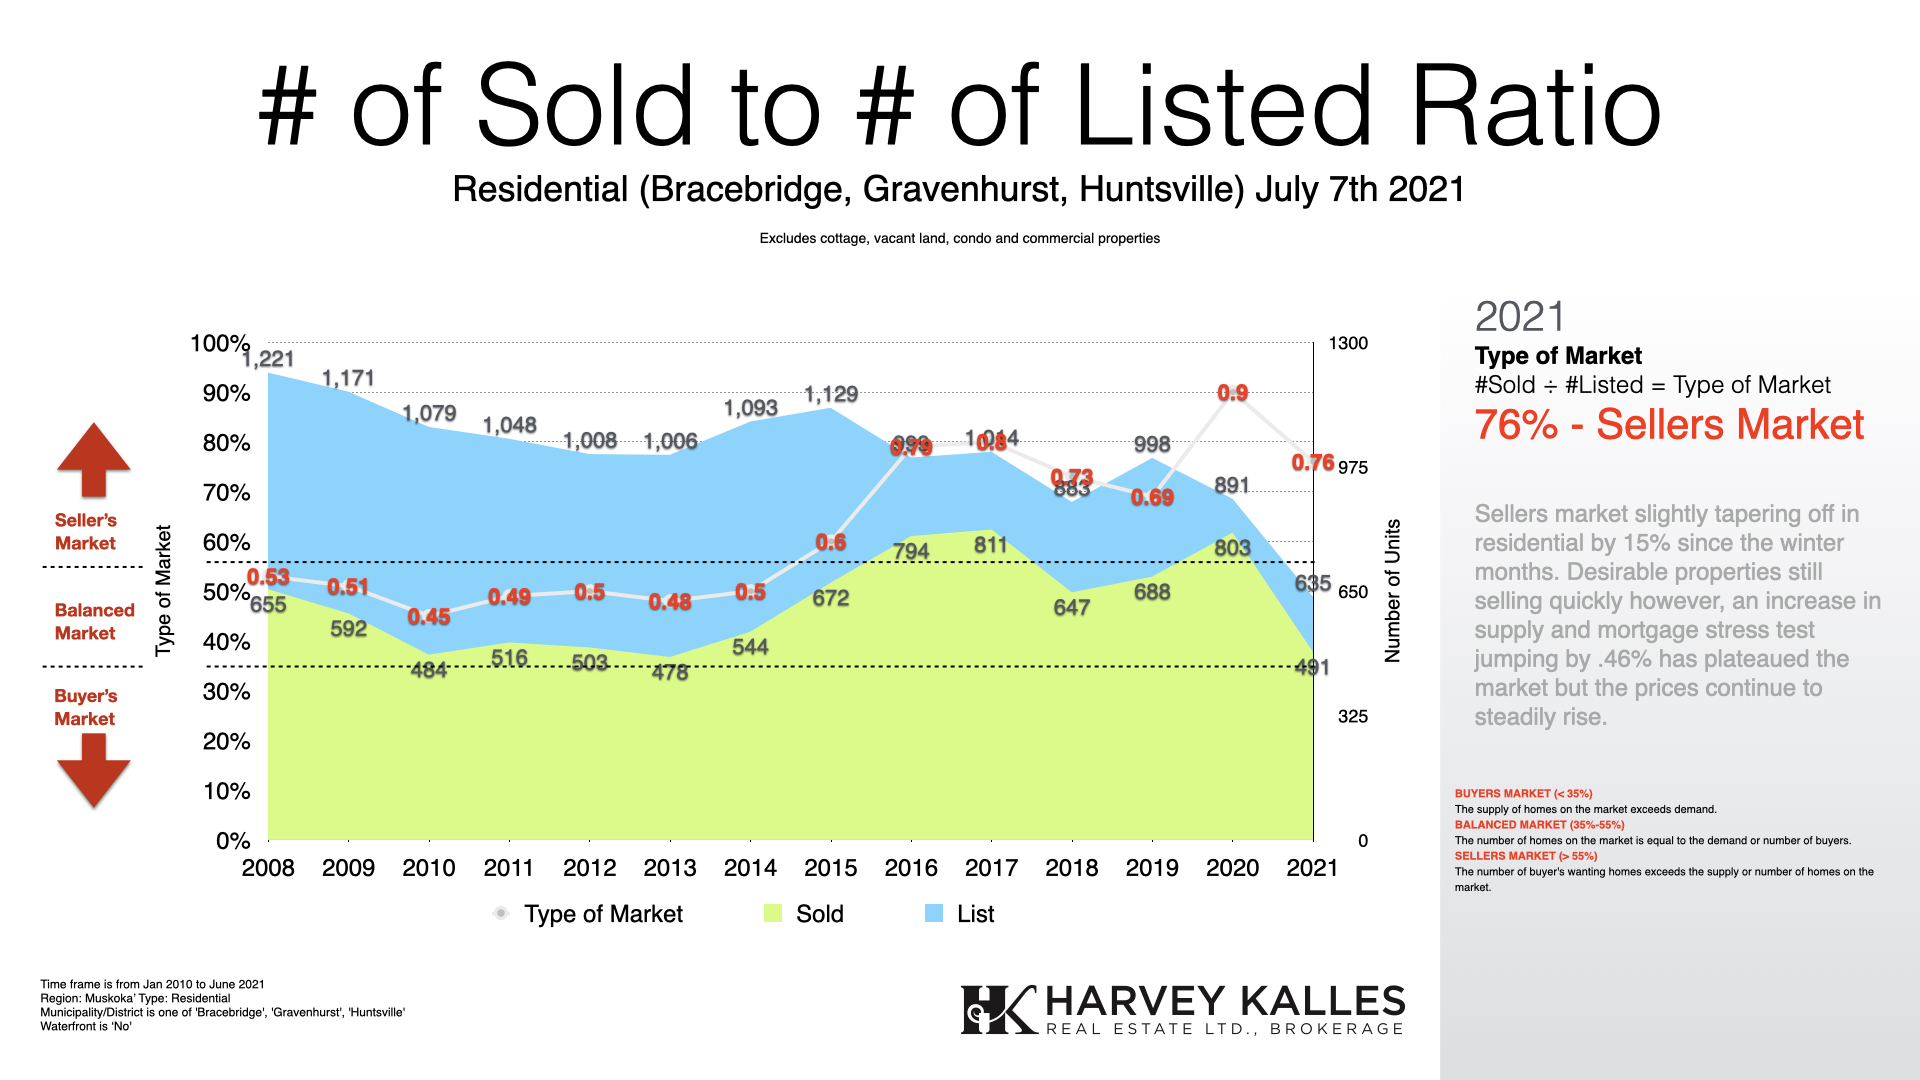 Muskoka Residential Sold to List Ratio June 2021, 76% Sold to List